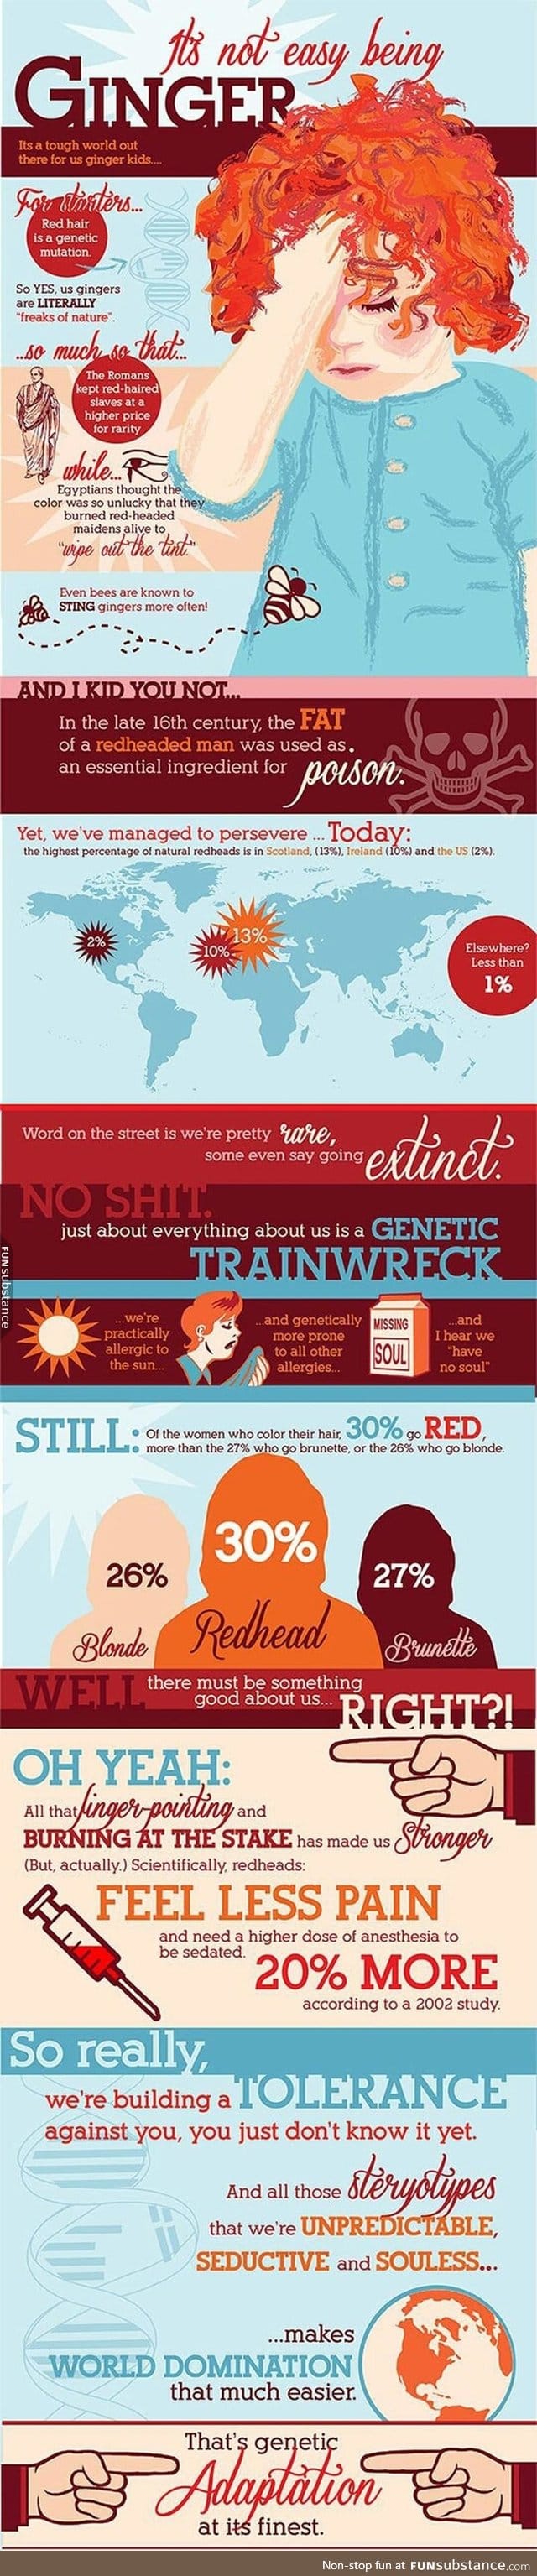 Facts about gingers